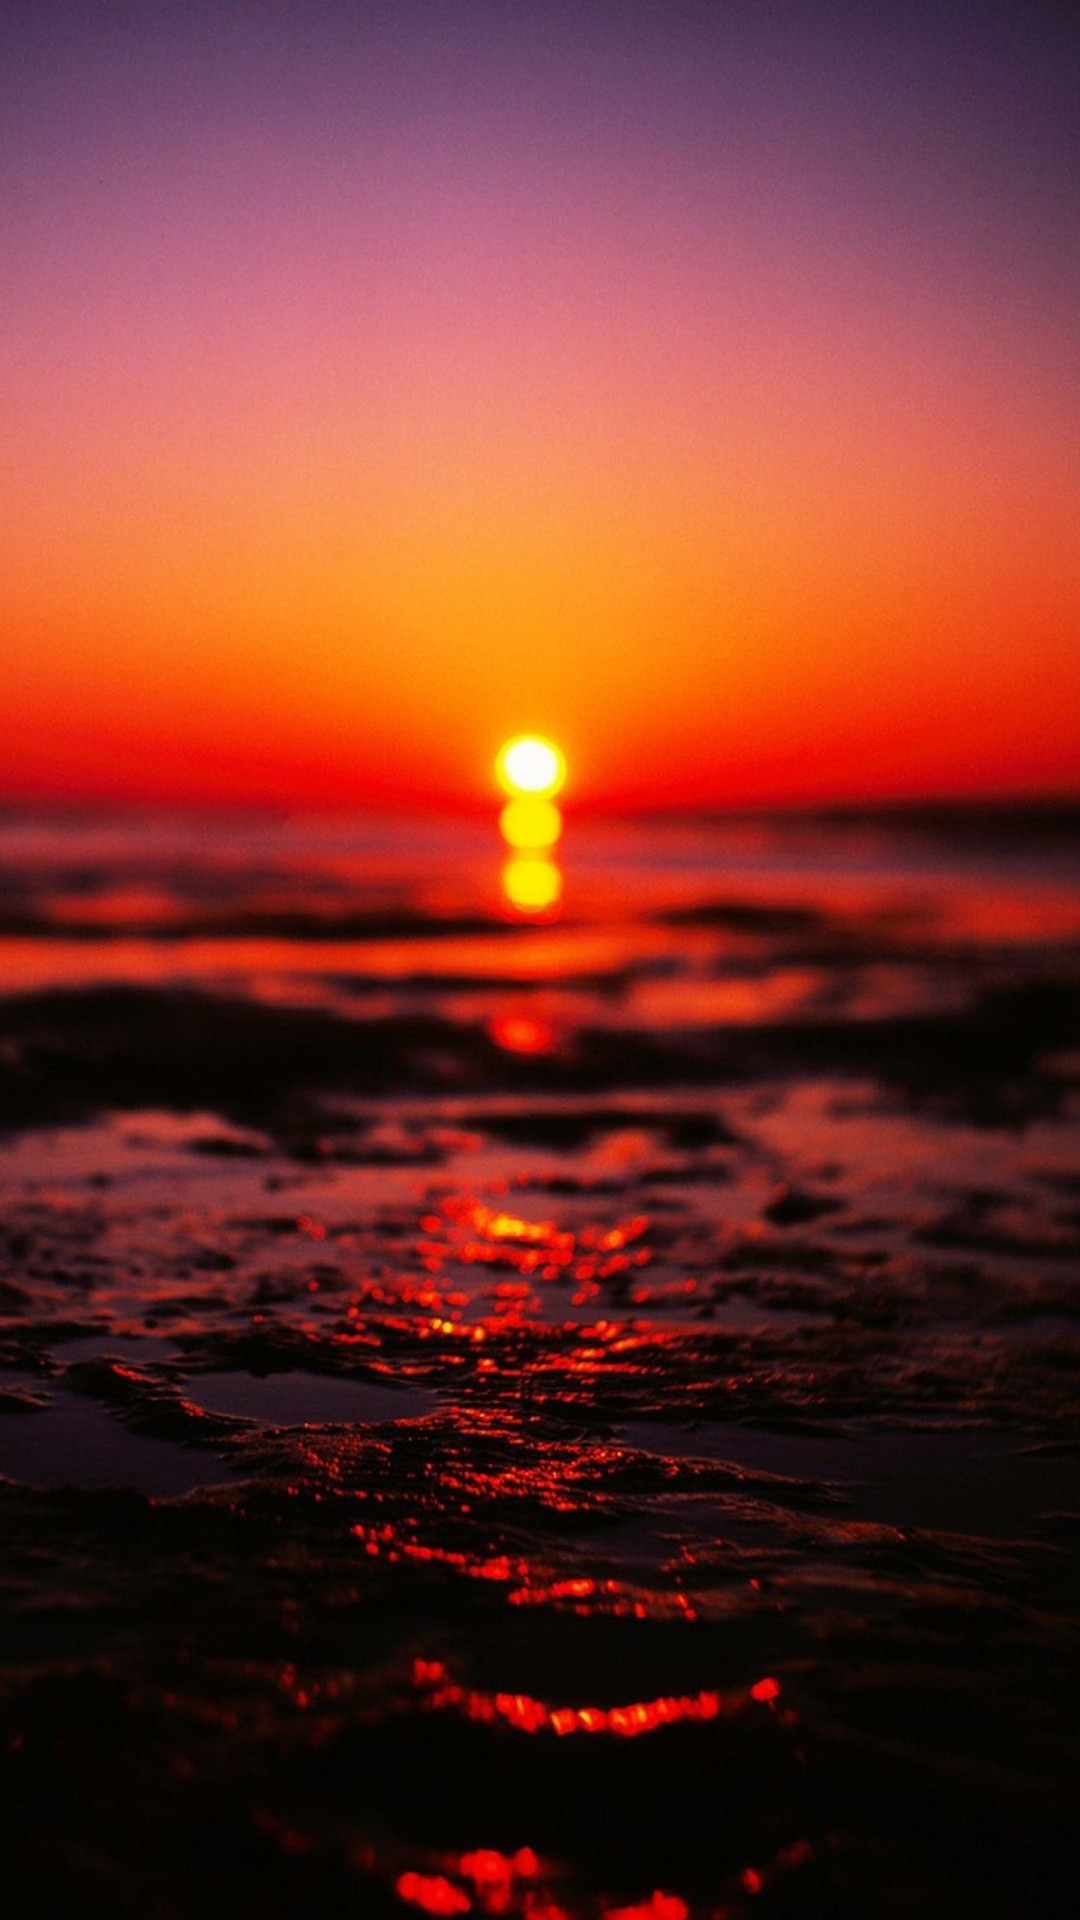 Sunrise wallpaper for android